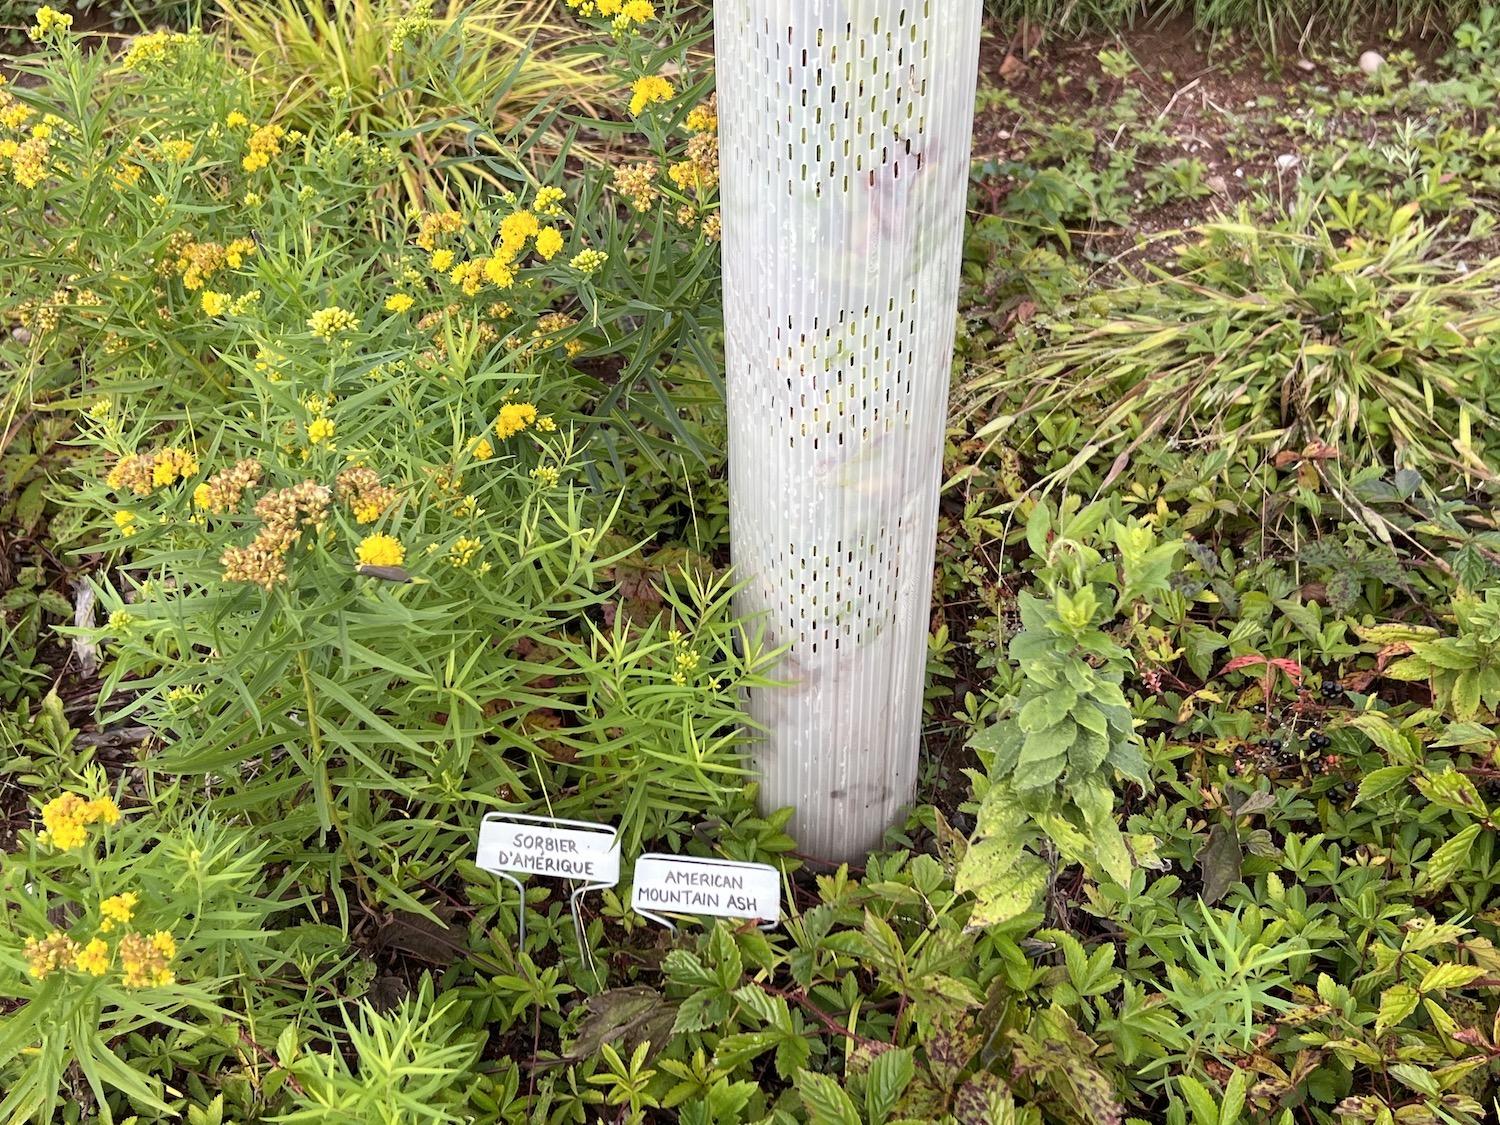 The pollinator garden uses tubes like this to combat browsing deer.